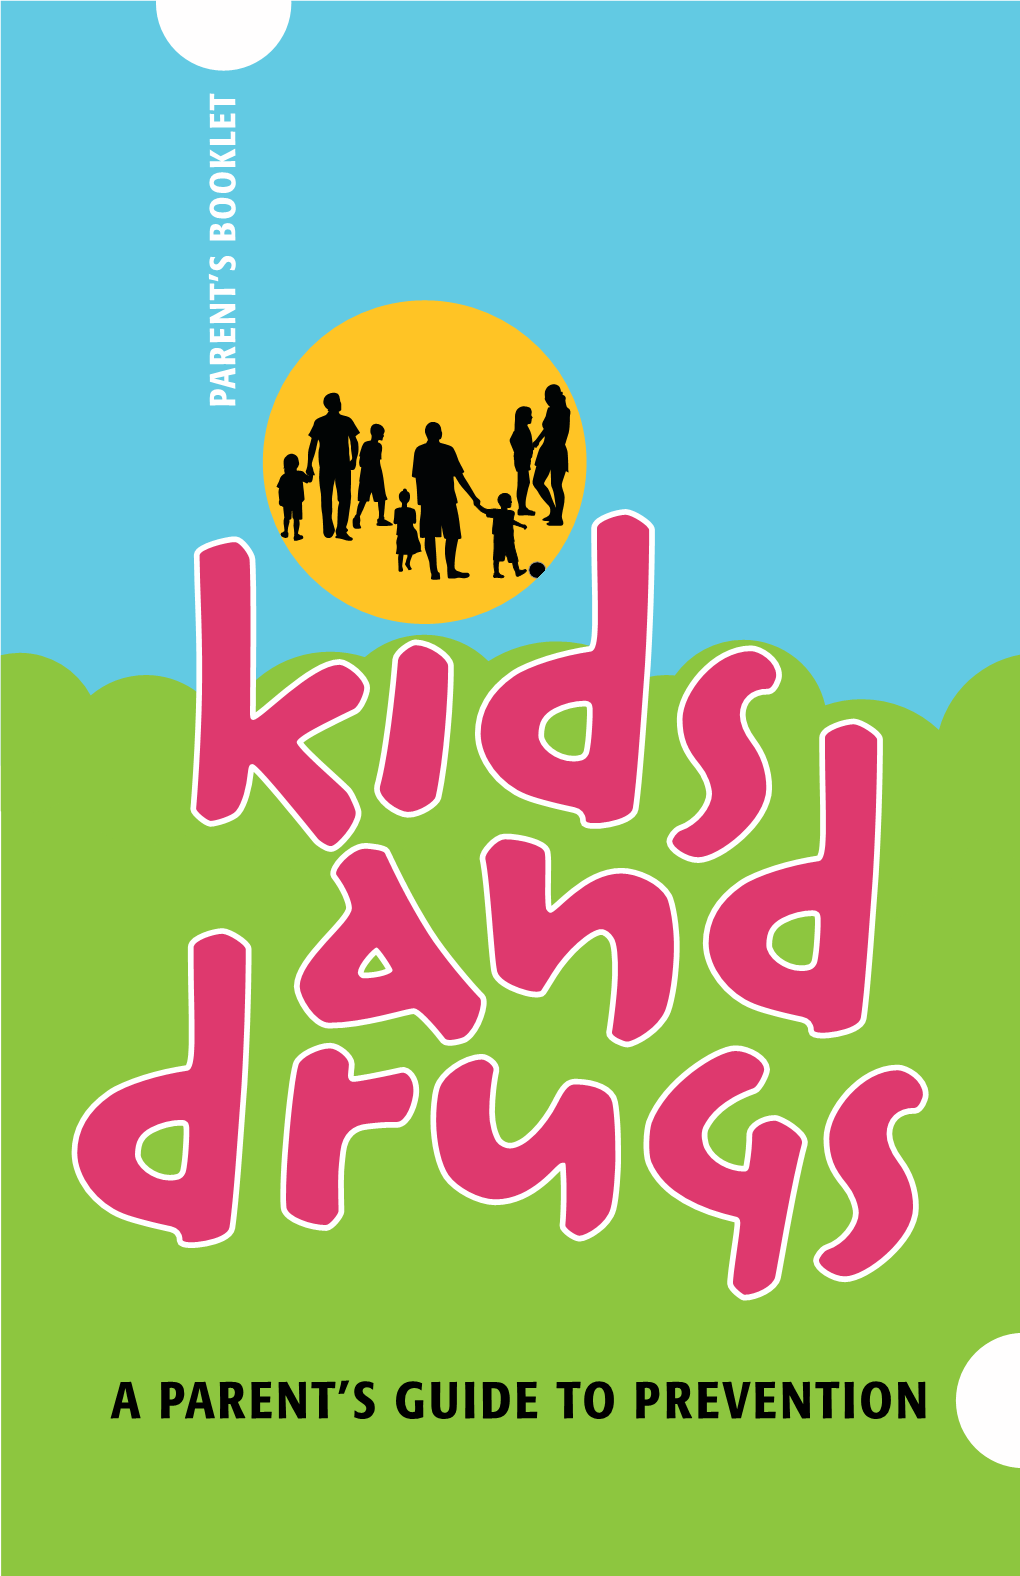 Kids and Drugs: a Parent's Guide to Prevention